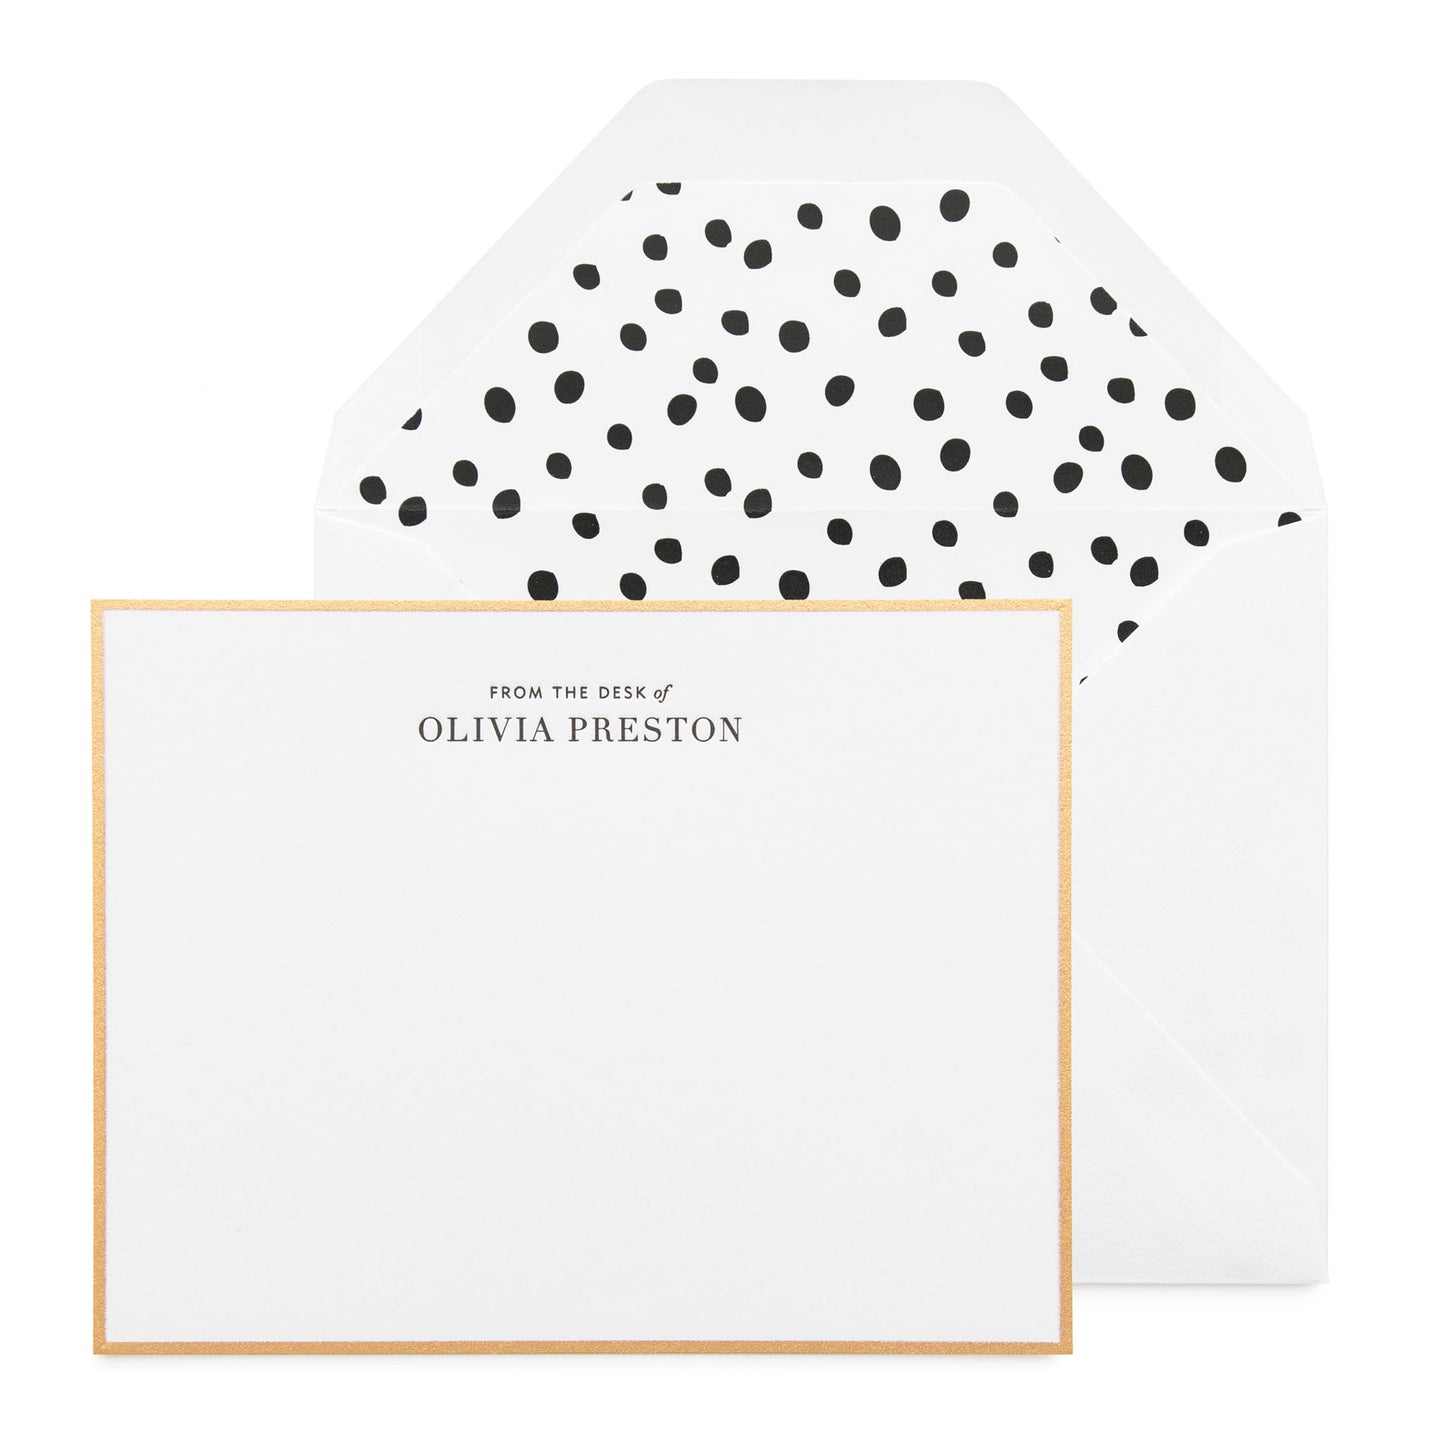 Black and white custom stationery printed with from the desk of, gold border and dalmatian dot liner